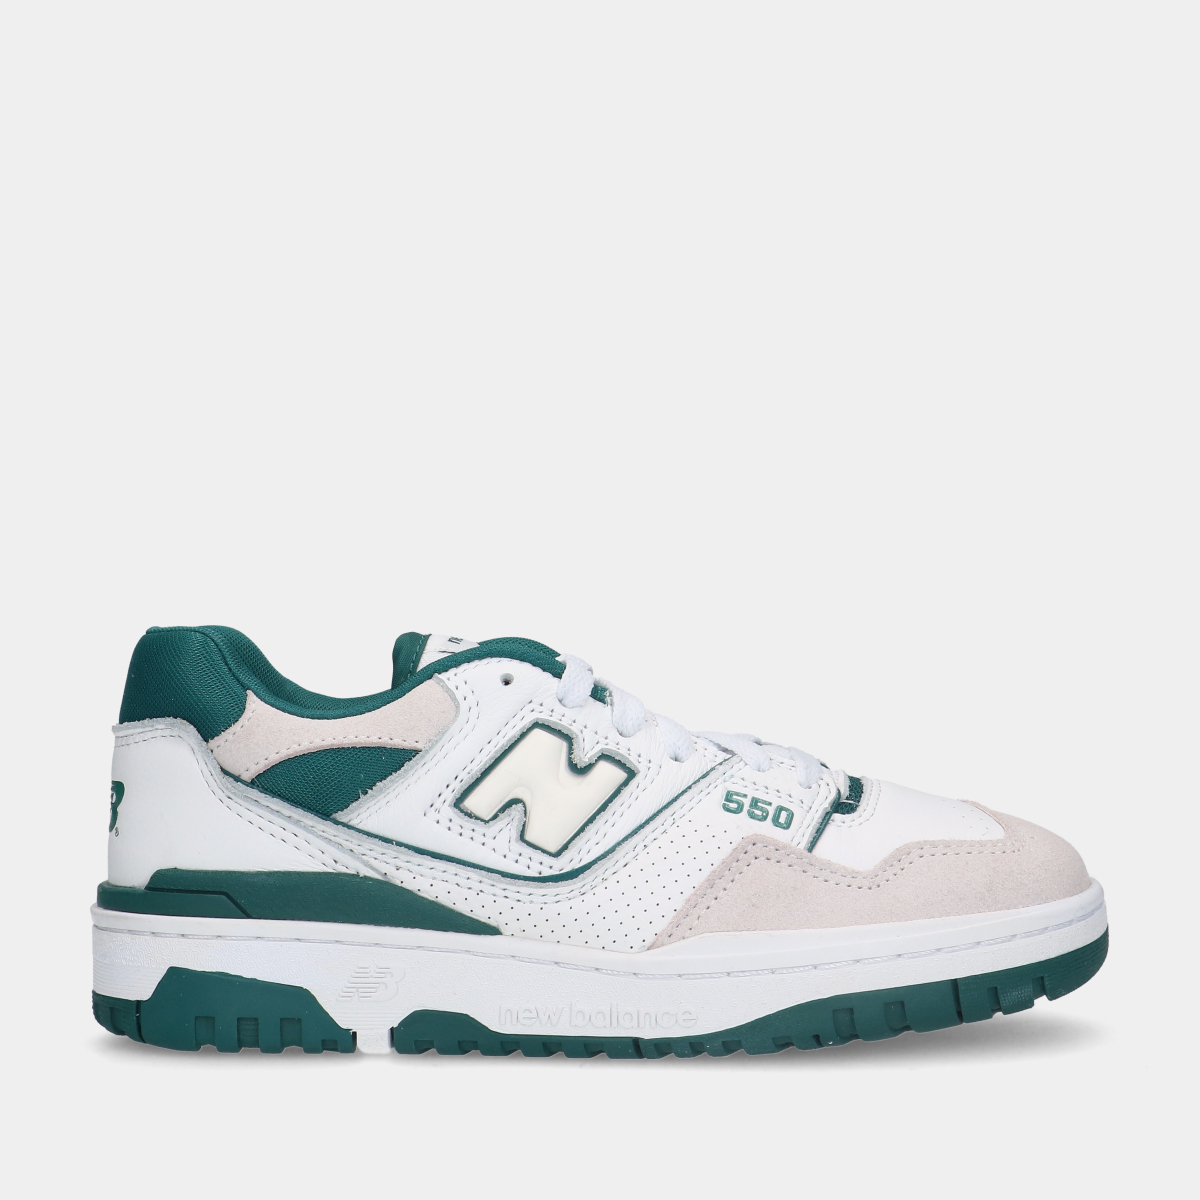 New Balance 550 White/Green sneakers